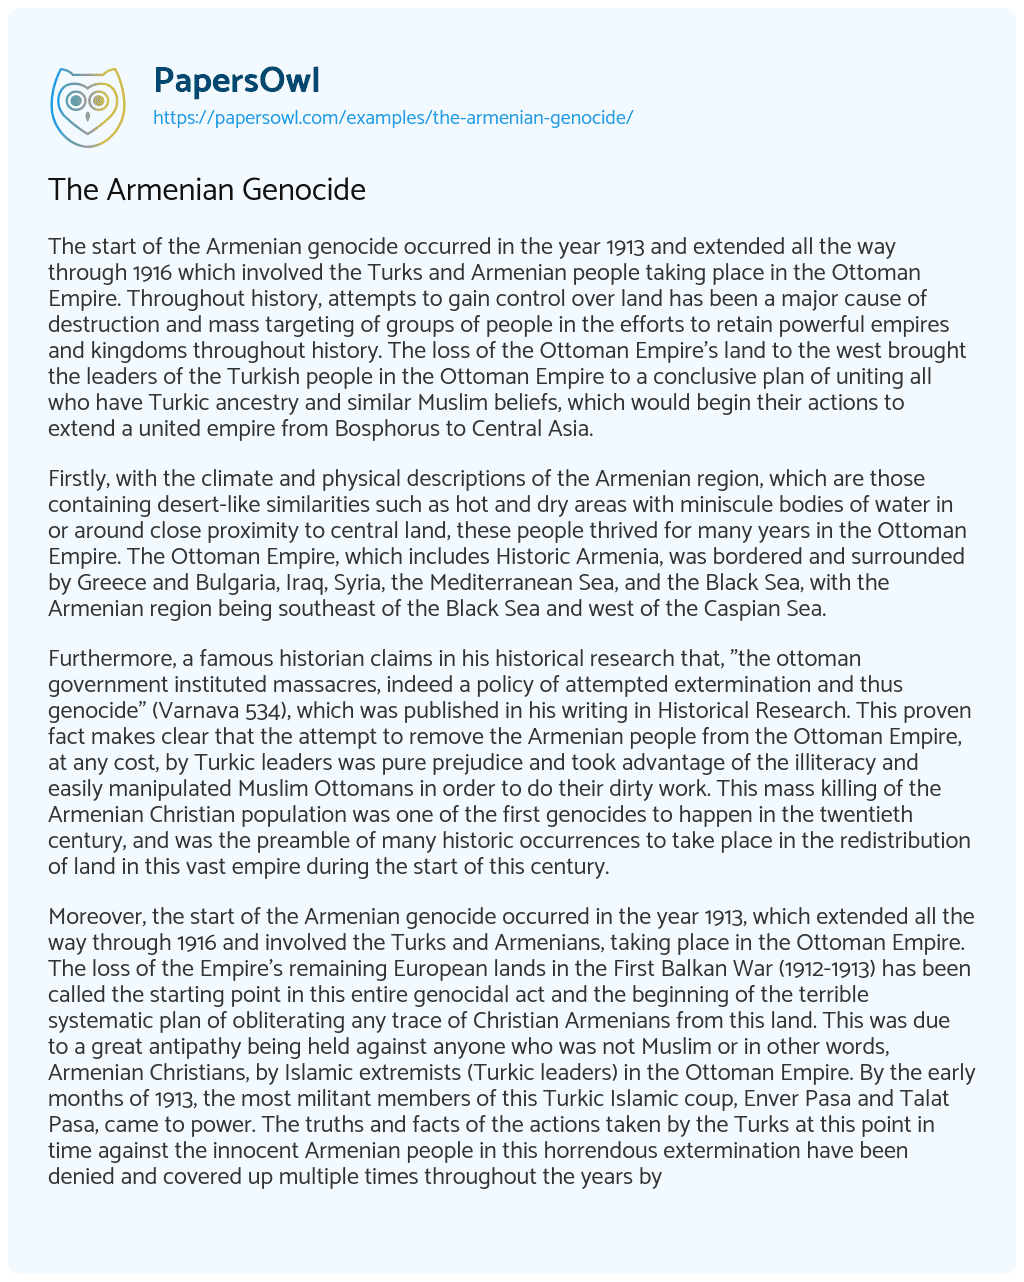 Essay on The Armenian Genocide